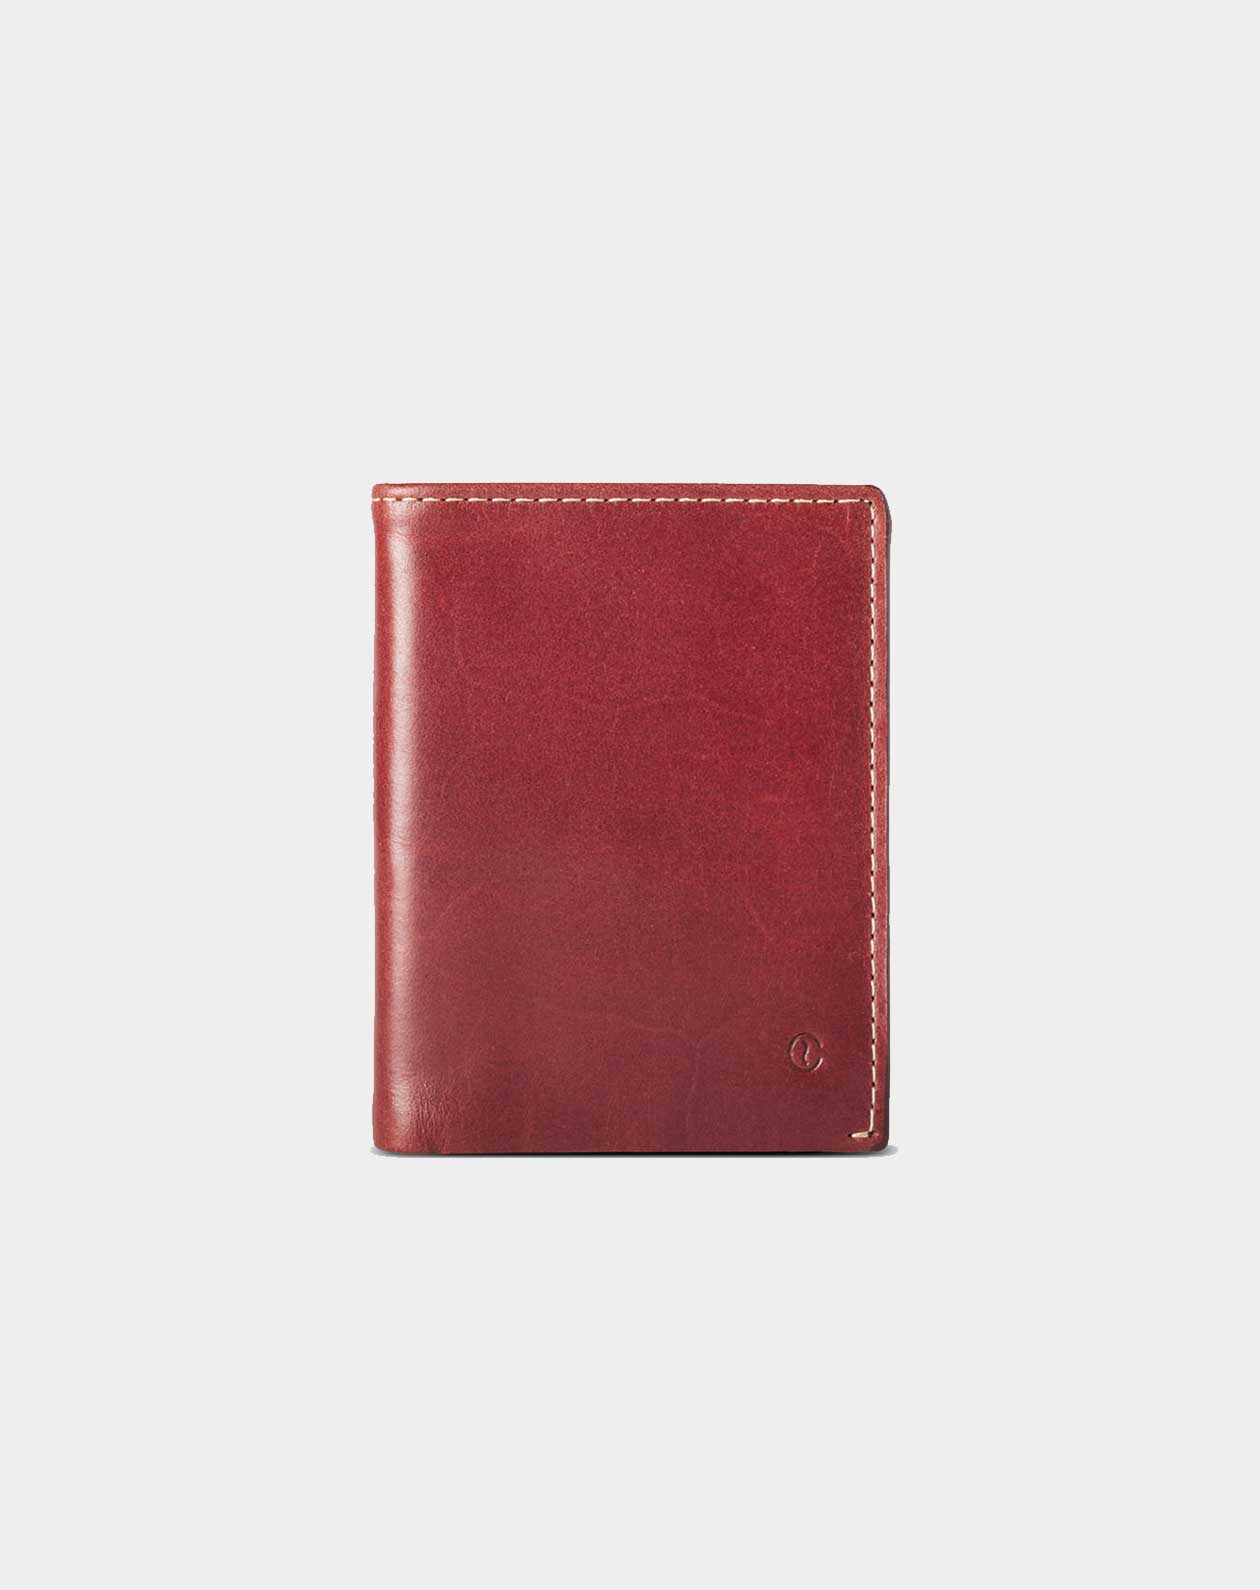 leather wallet slim red for coins and bills